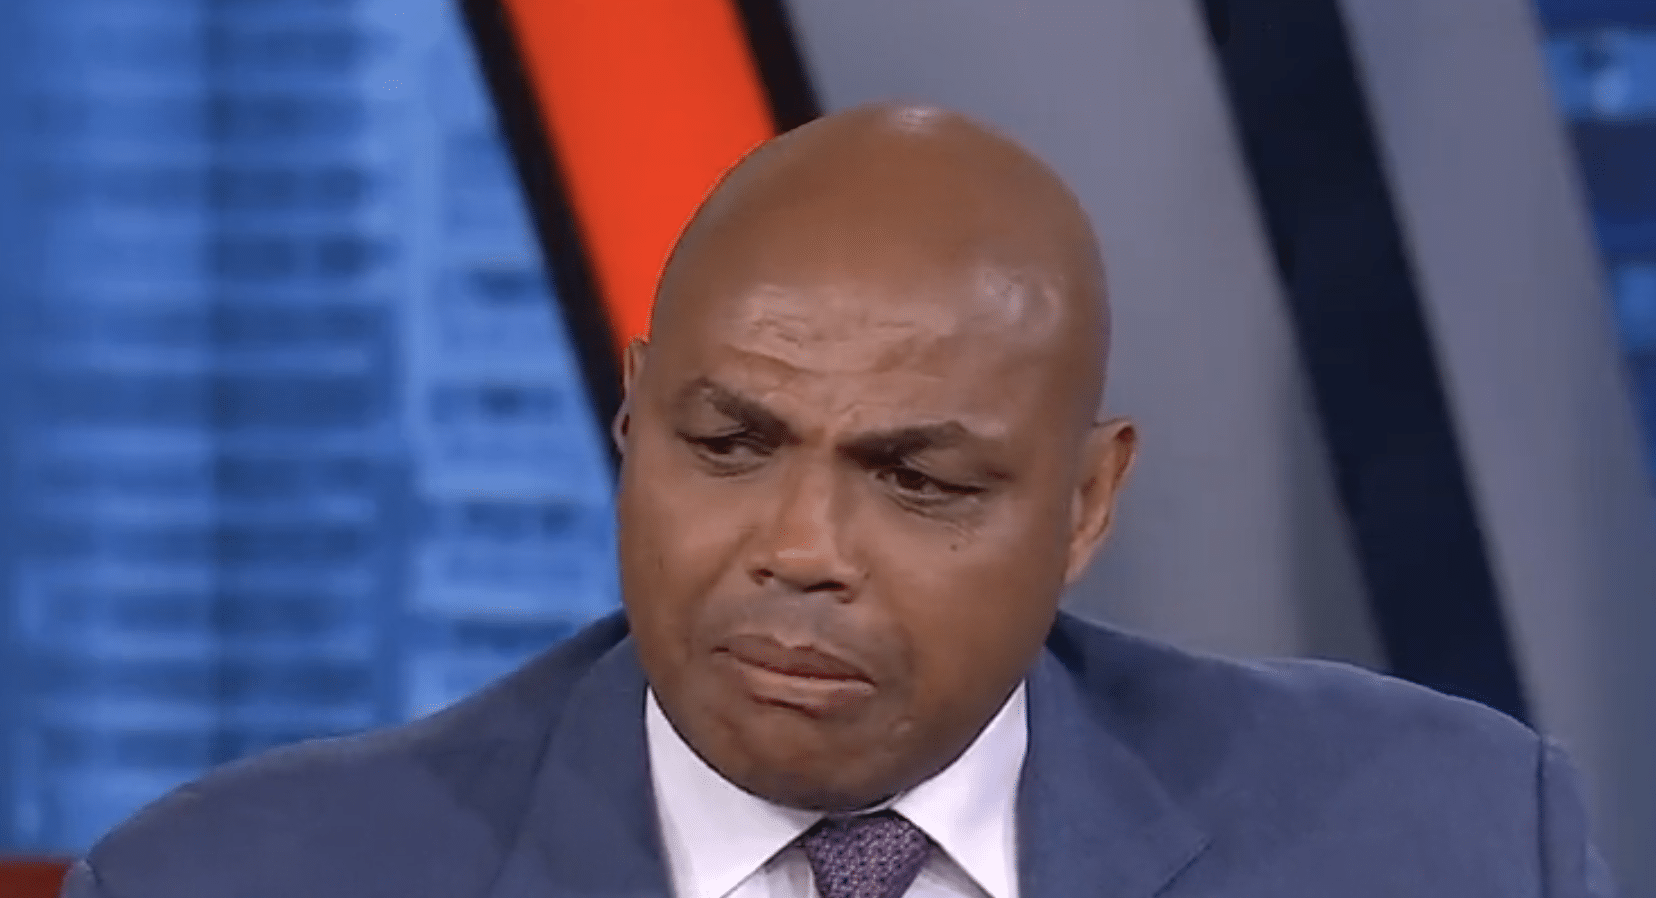 Charles Barkley Brought Up ACME on TNT and Nobody Had A Clue What It Was